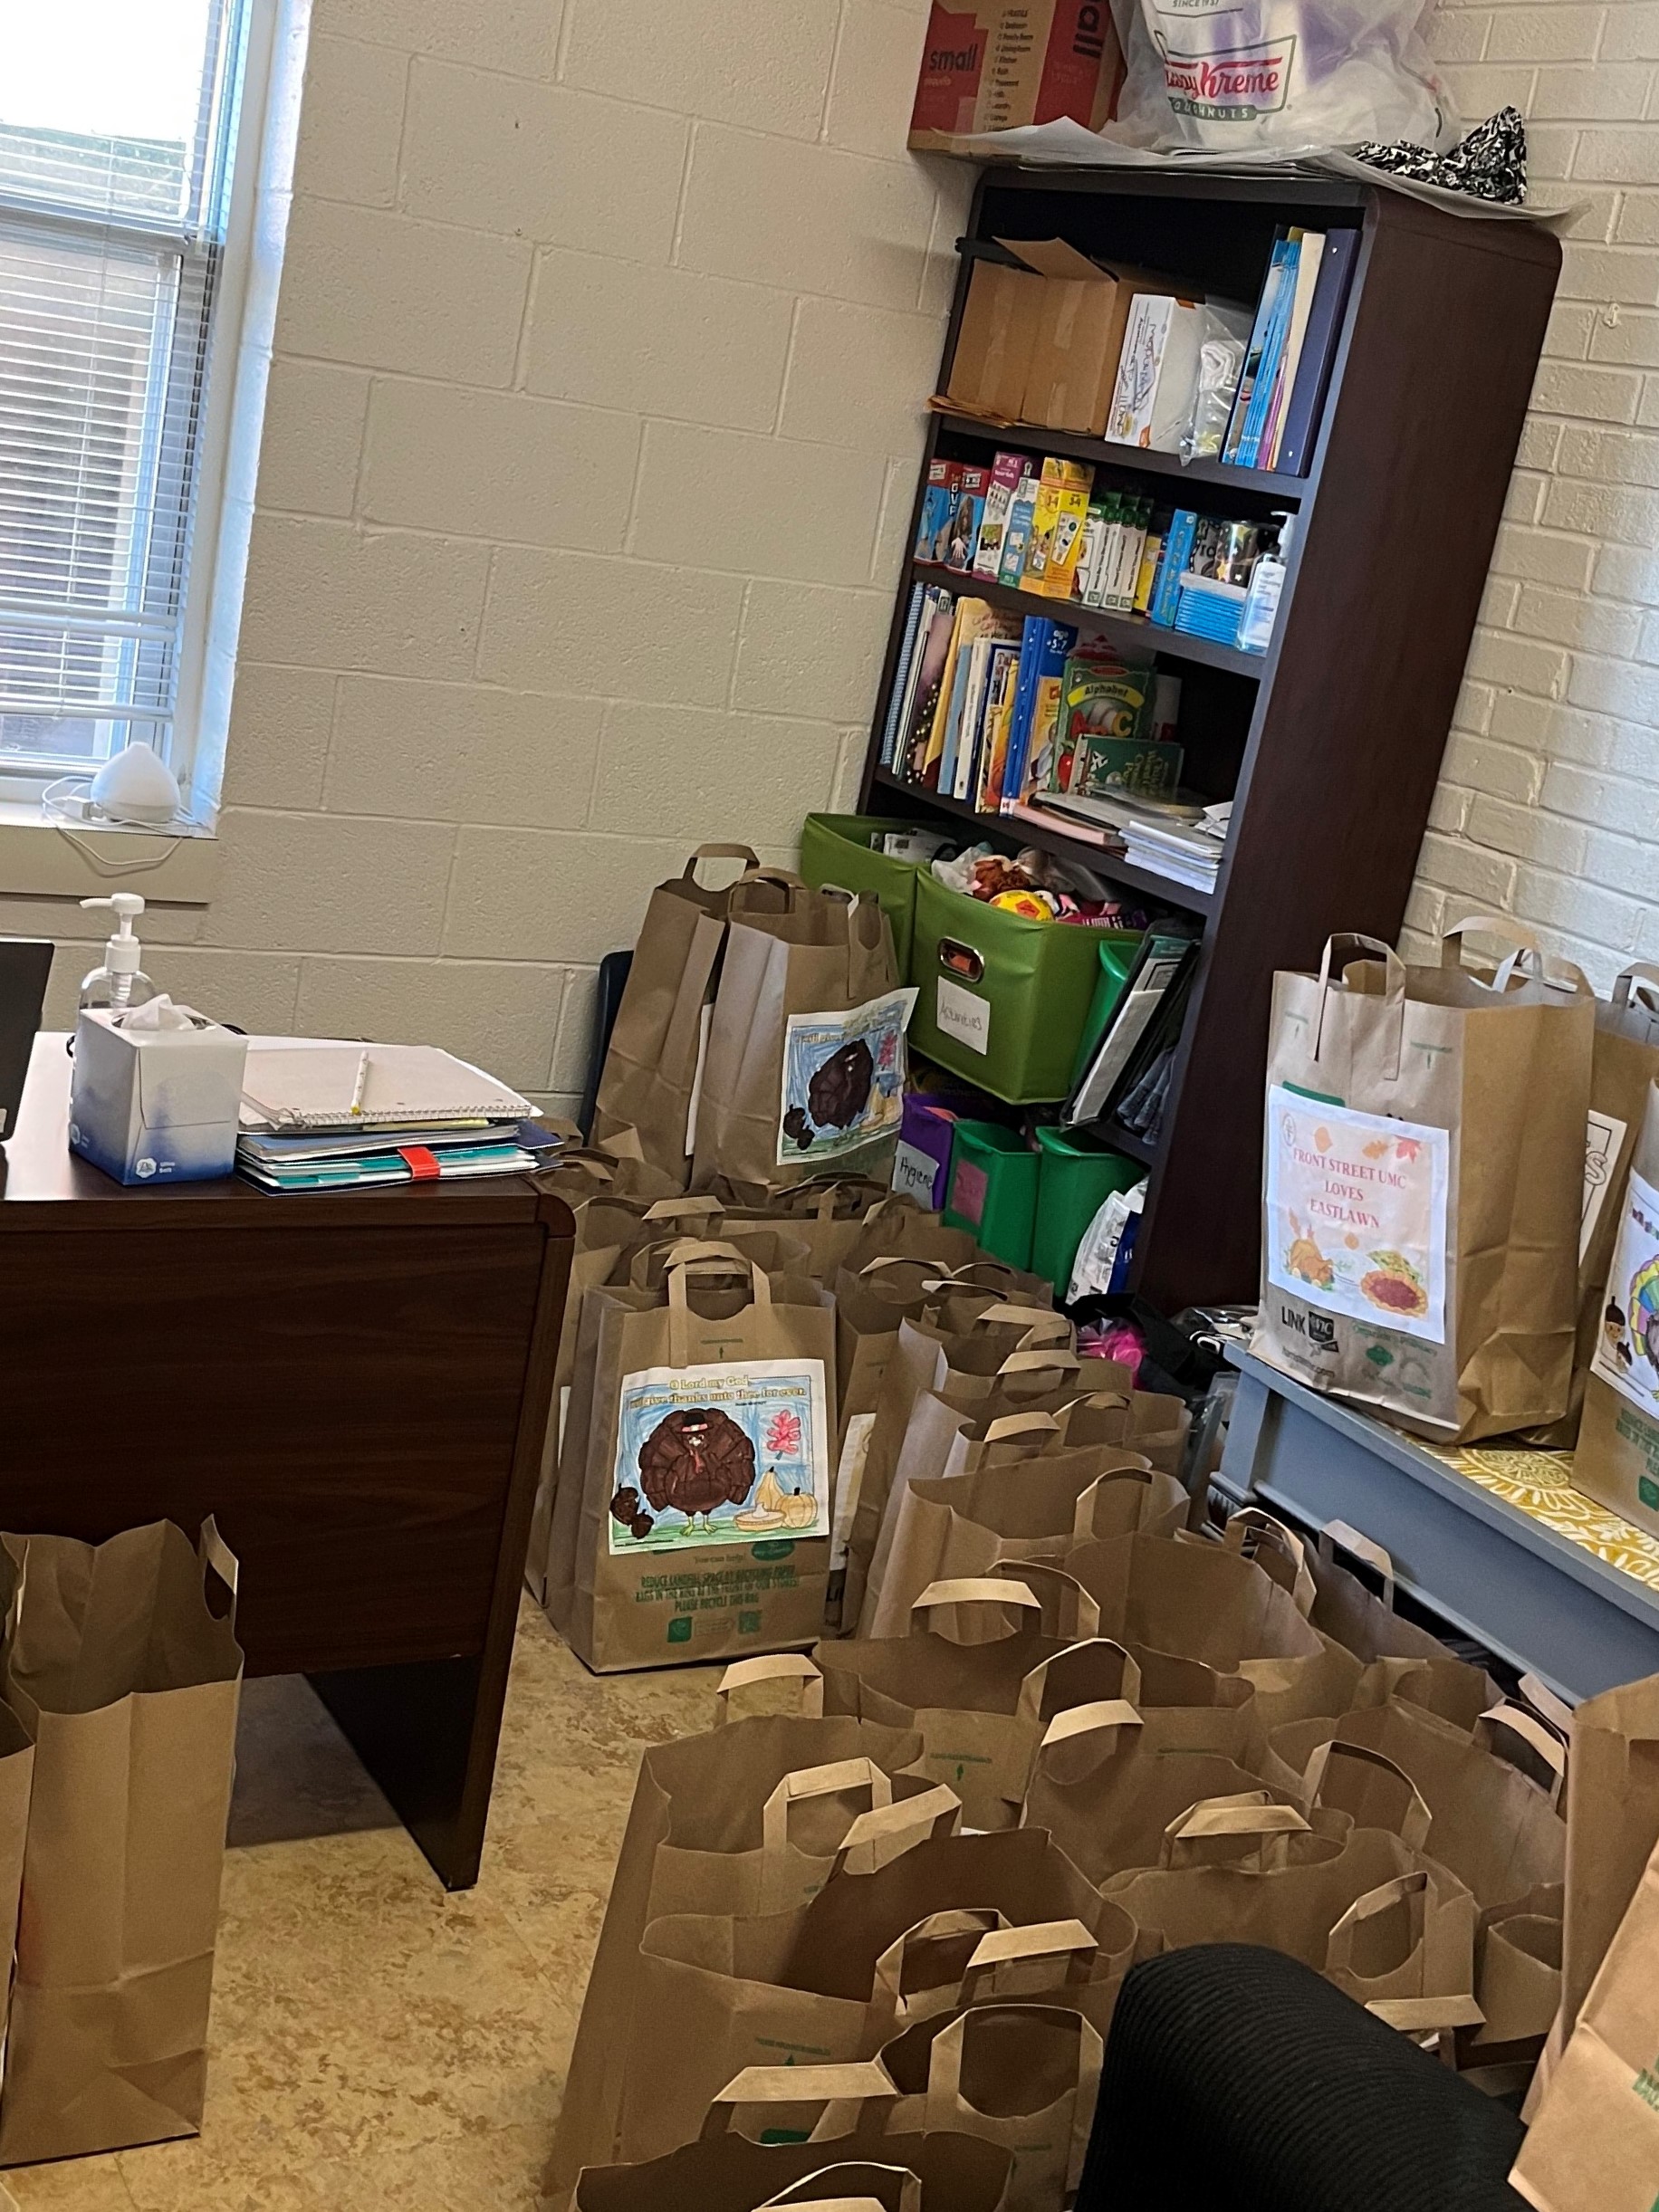 Sample of Thanksgiving Meals for families in need showing many large brown paper bags on the floor in an office filled with supplies